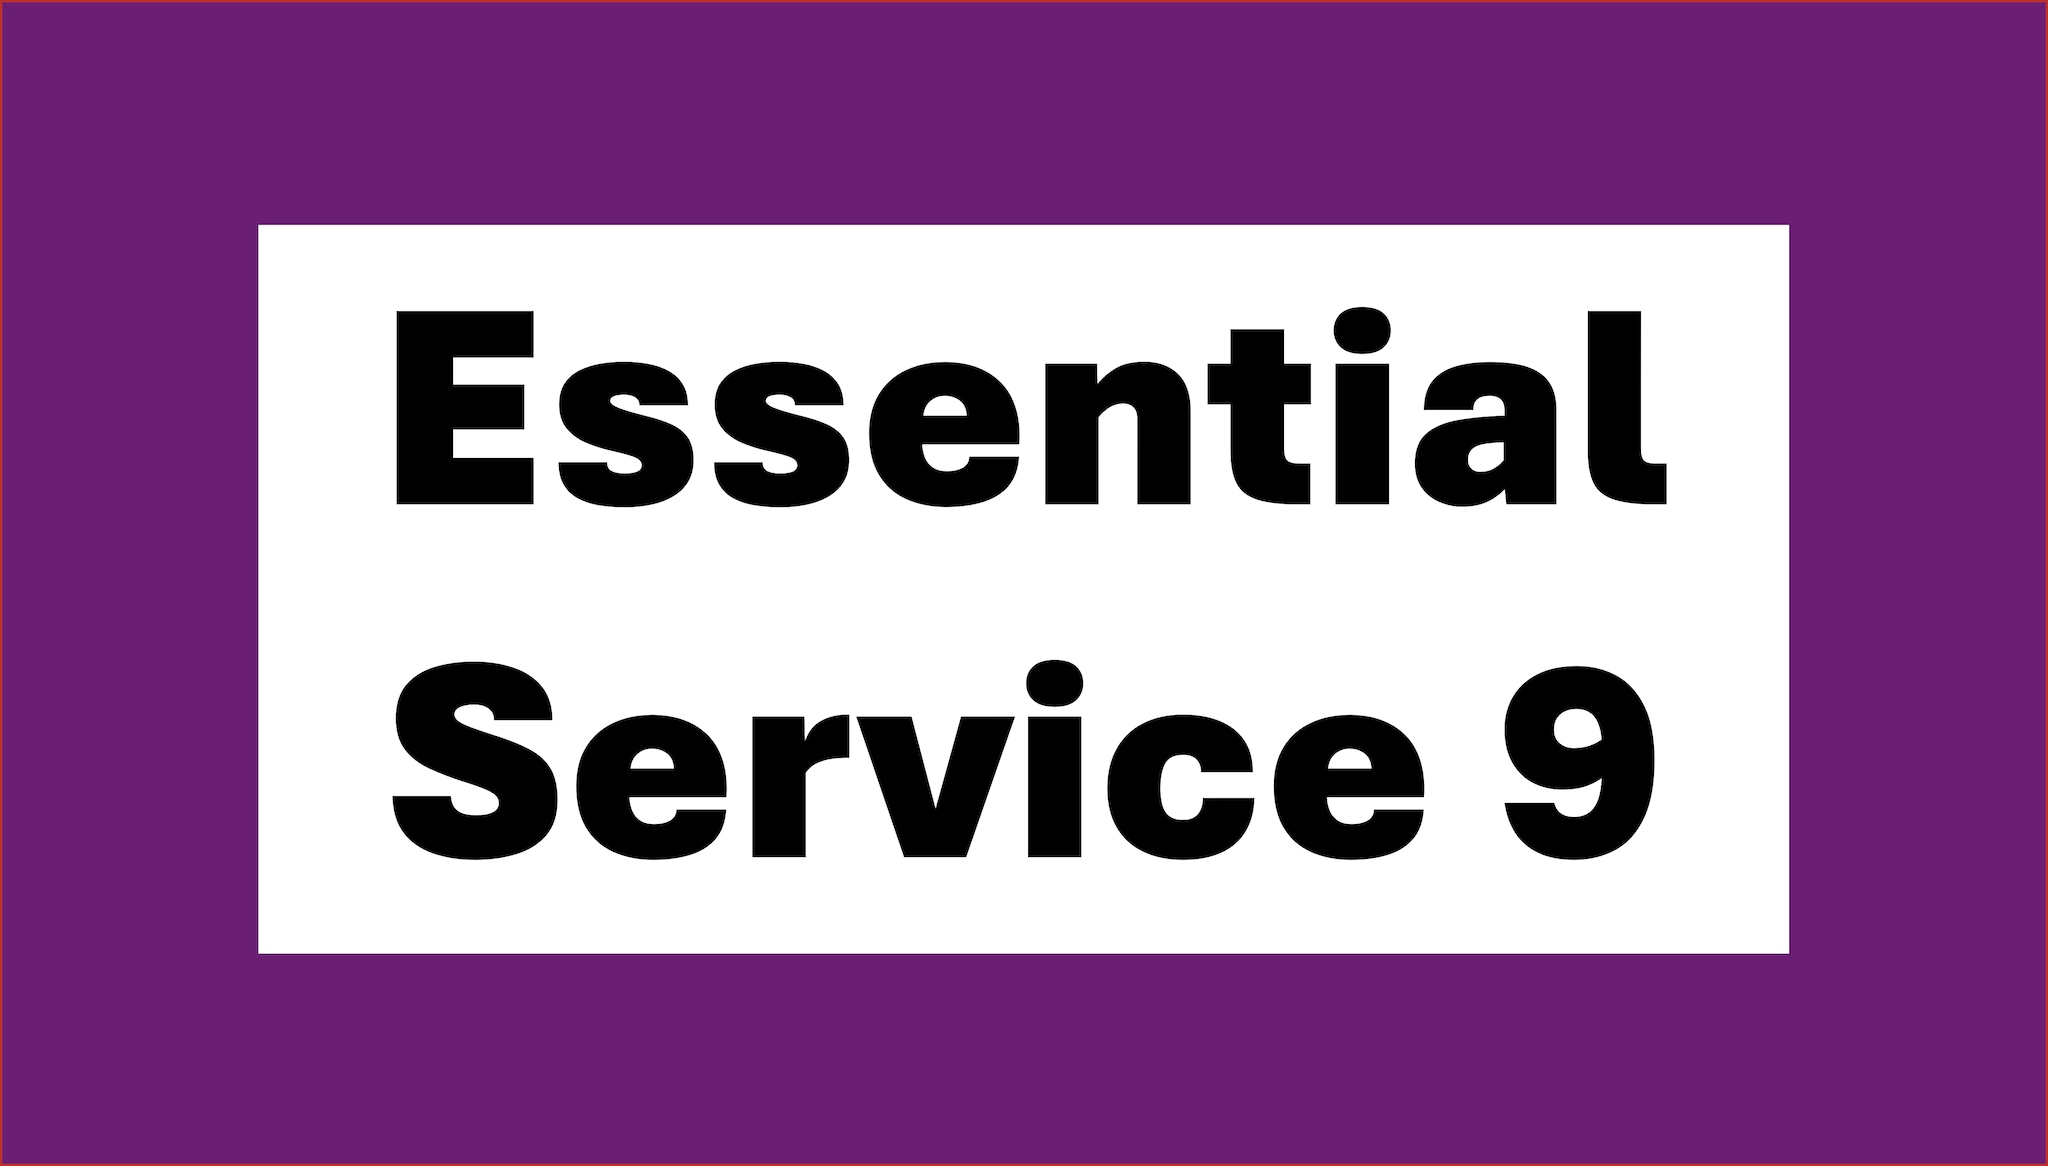 Purple graphic with black text in white box reading Essential Service 9